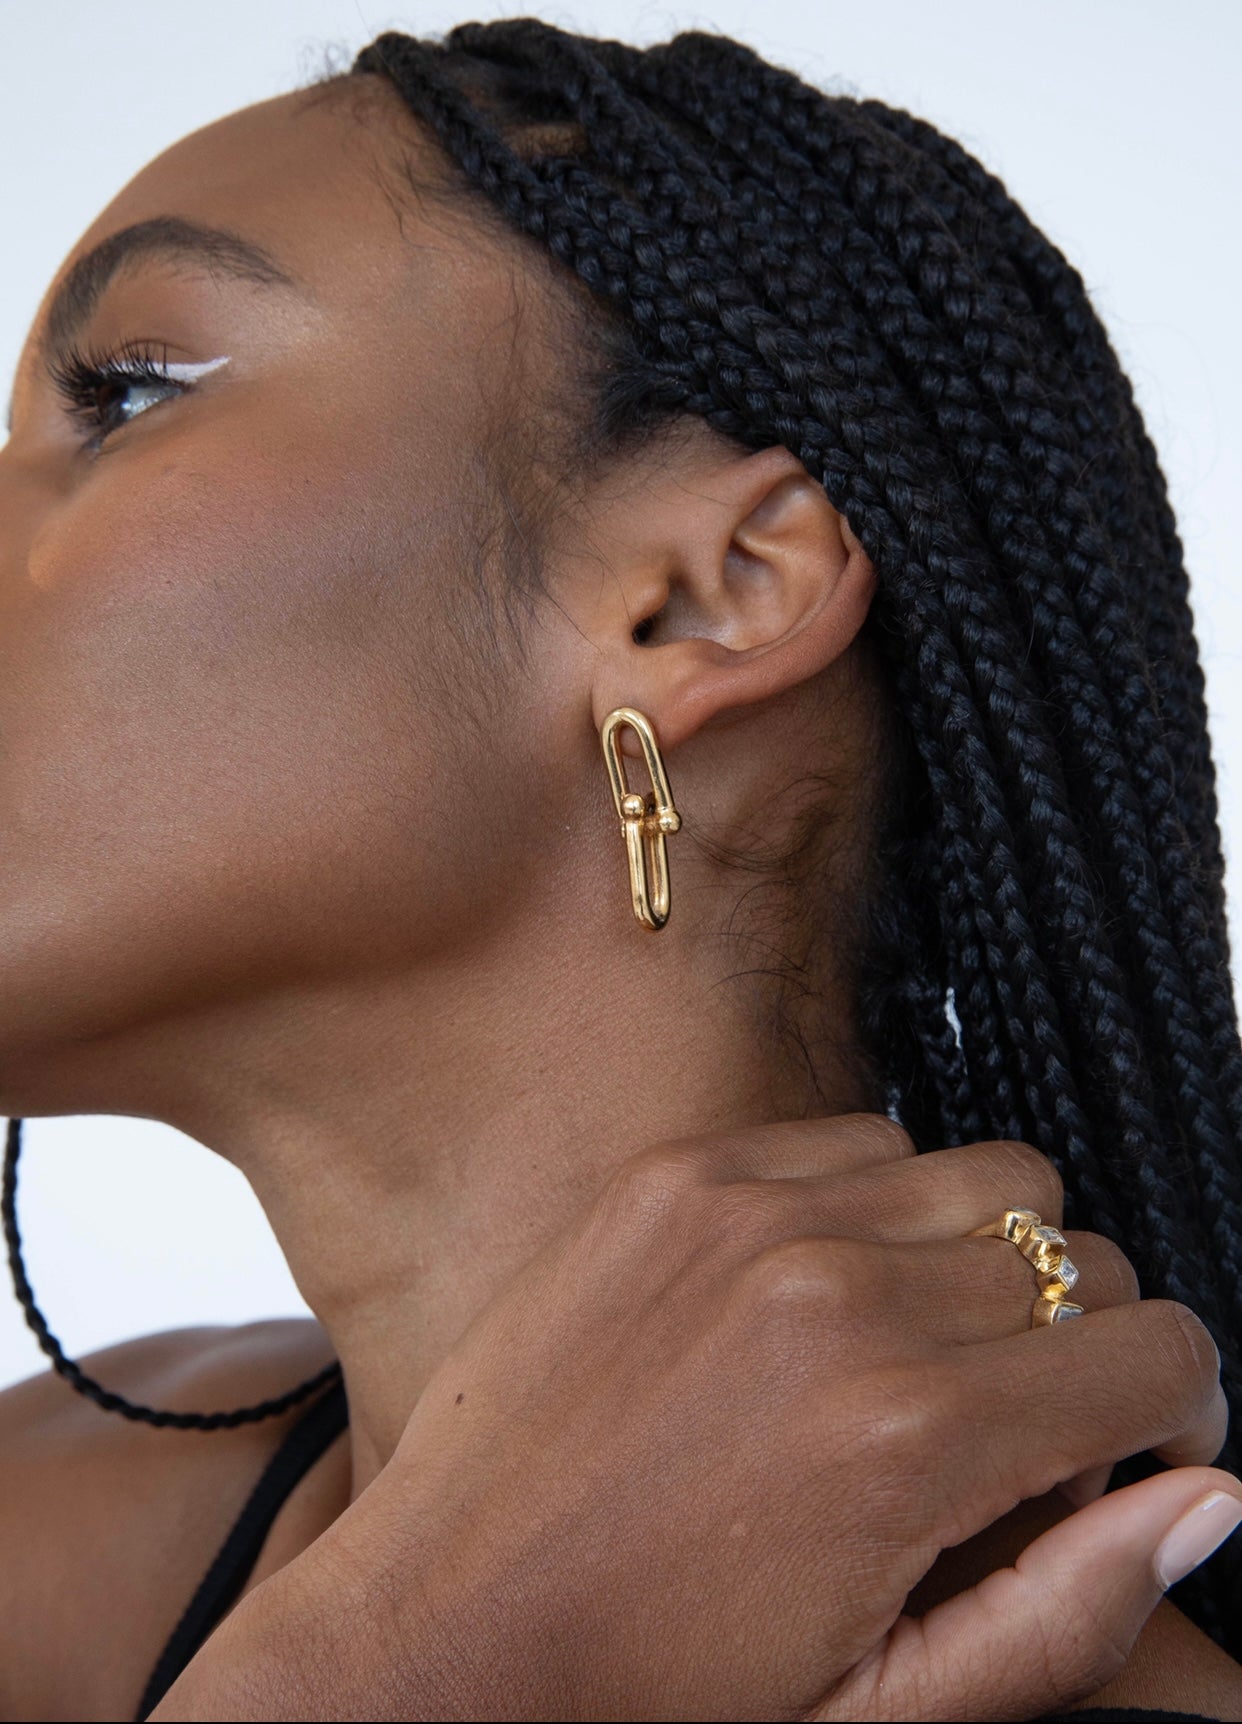 18K Gold Plated Theo link earrings